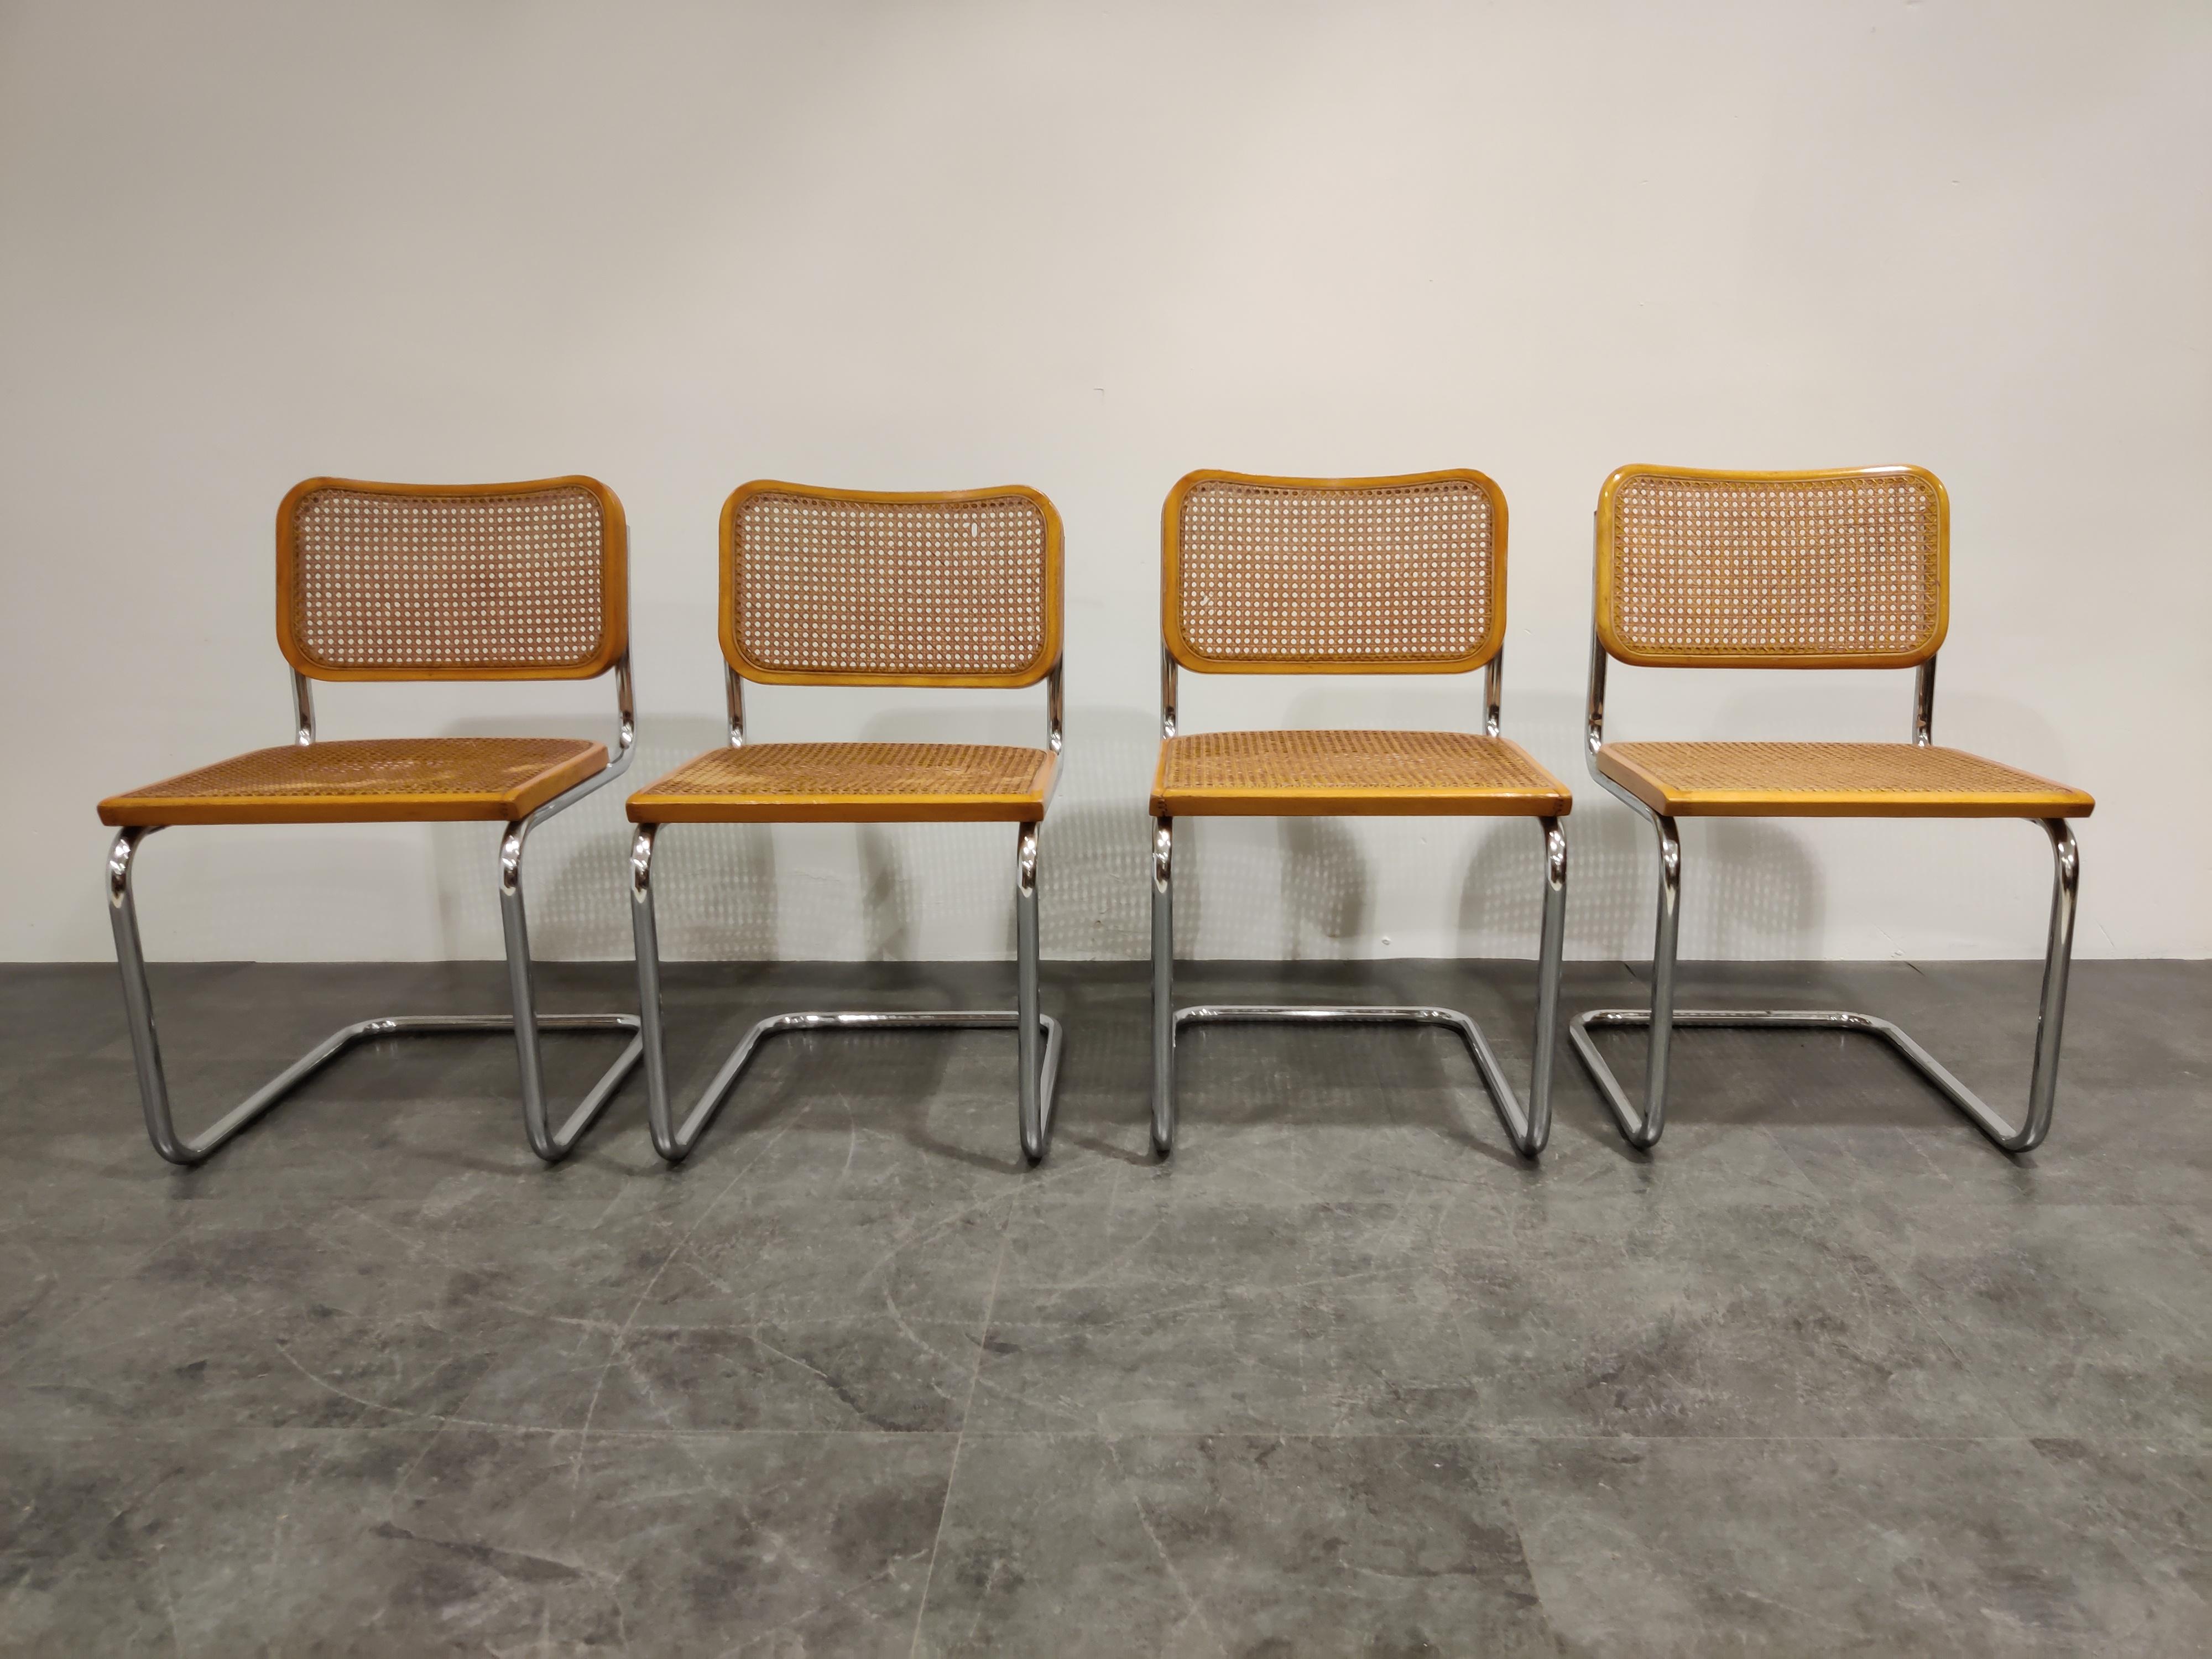 Marcel Breuer Bauhaus design chairs. 

Original used condition, still very usable and no major damages.

These are quite early edition with a sticker we haven't seen before.

Labeled 'made in italy'

1970s - Italy

Dimensions:
Height